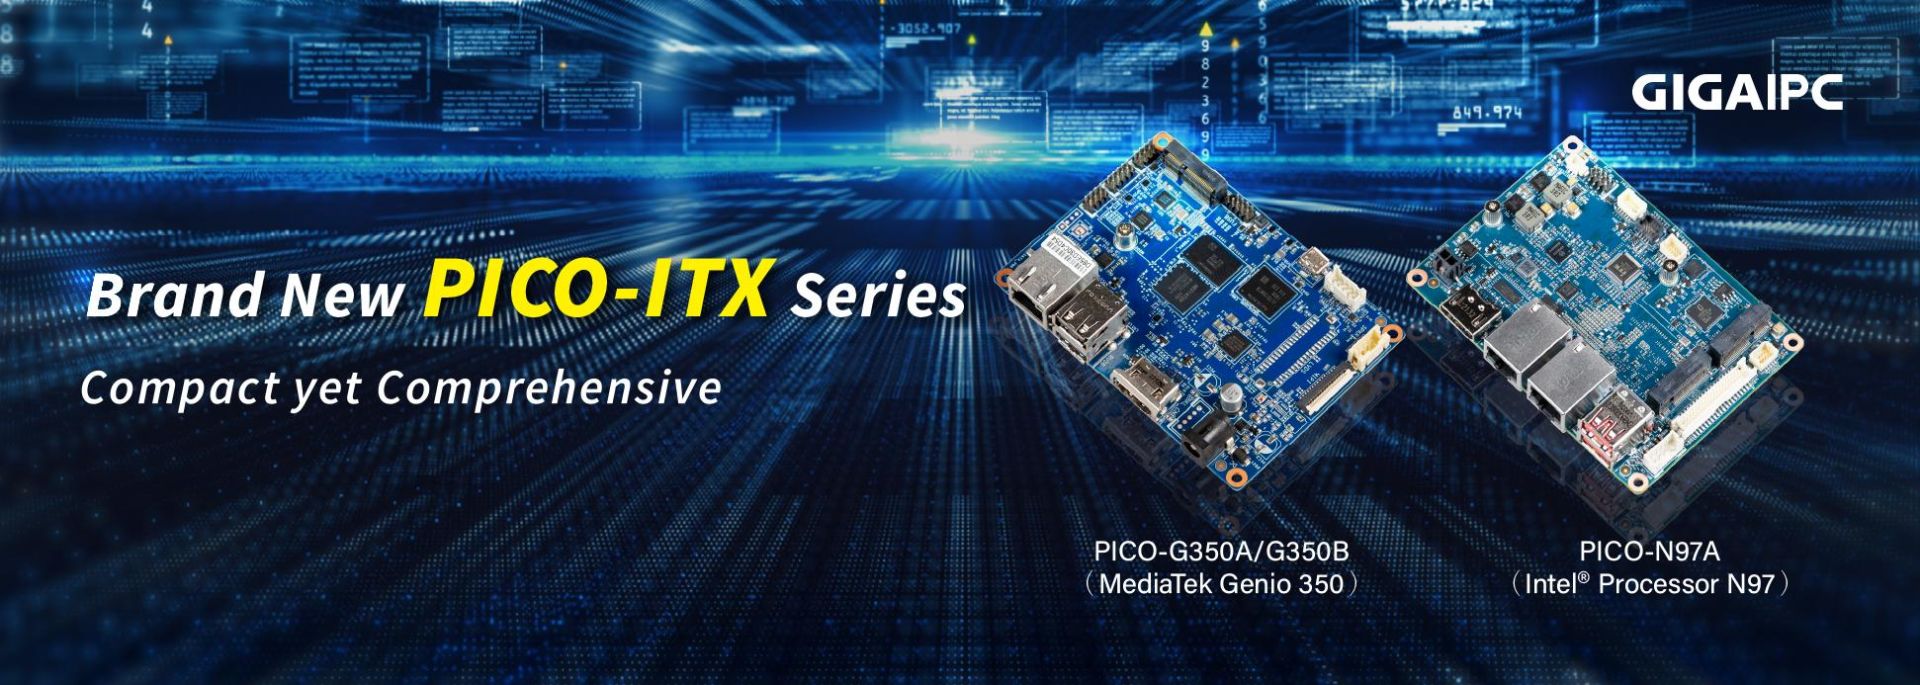 Introducing NEW PICO-ITX Product Series!